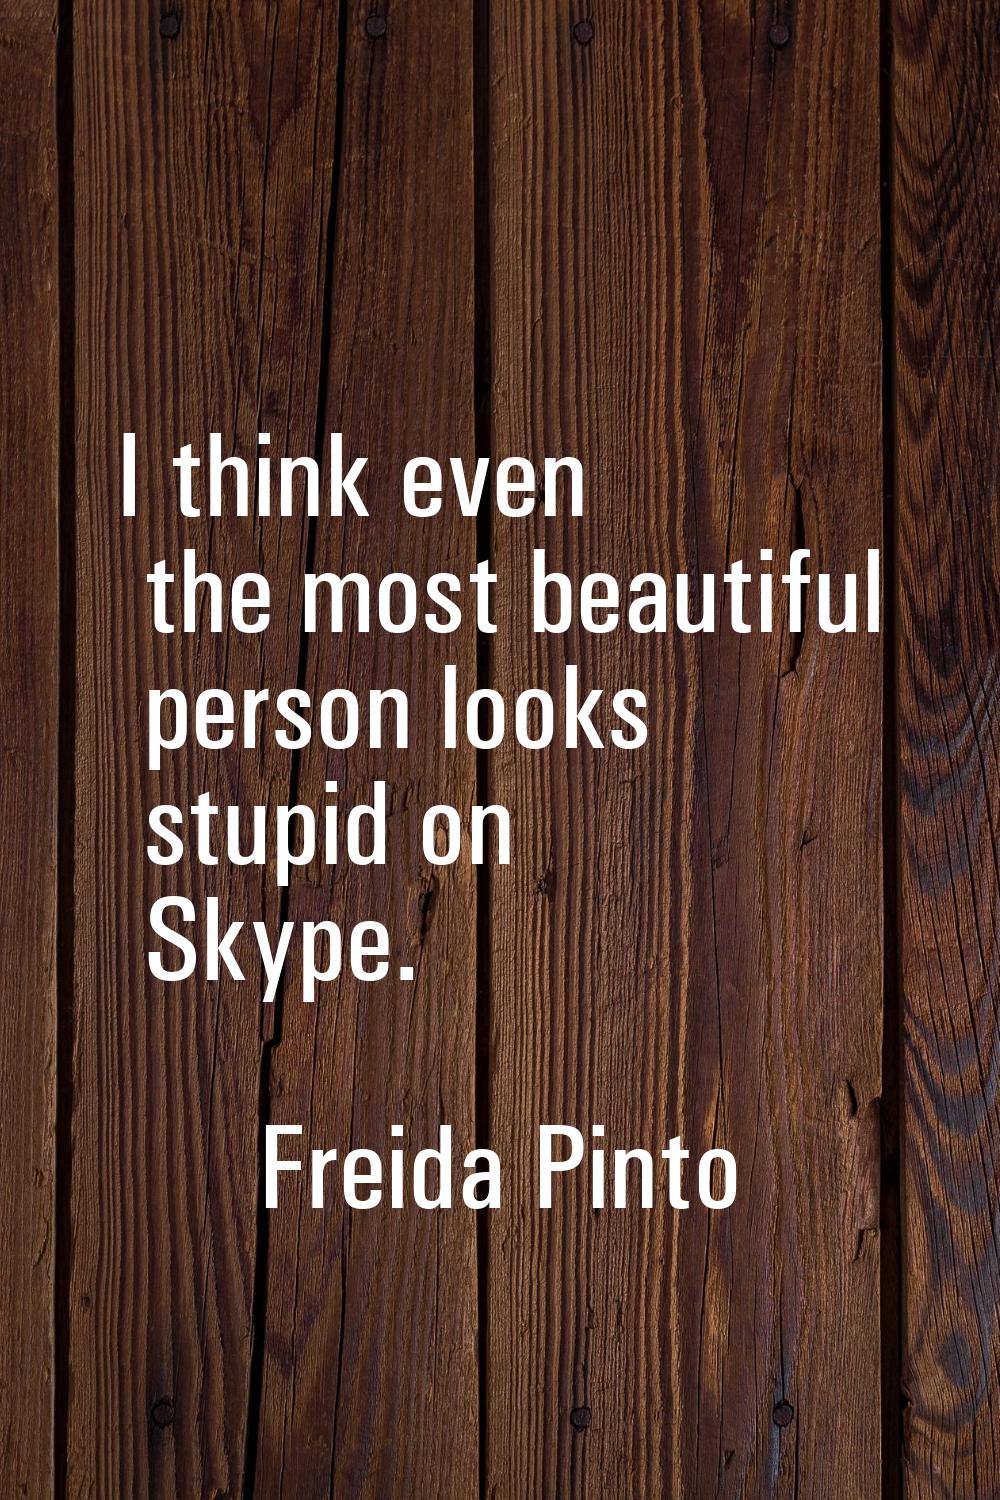 I think even the most beautiful person looks stupid on Skype.